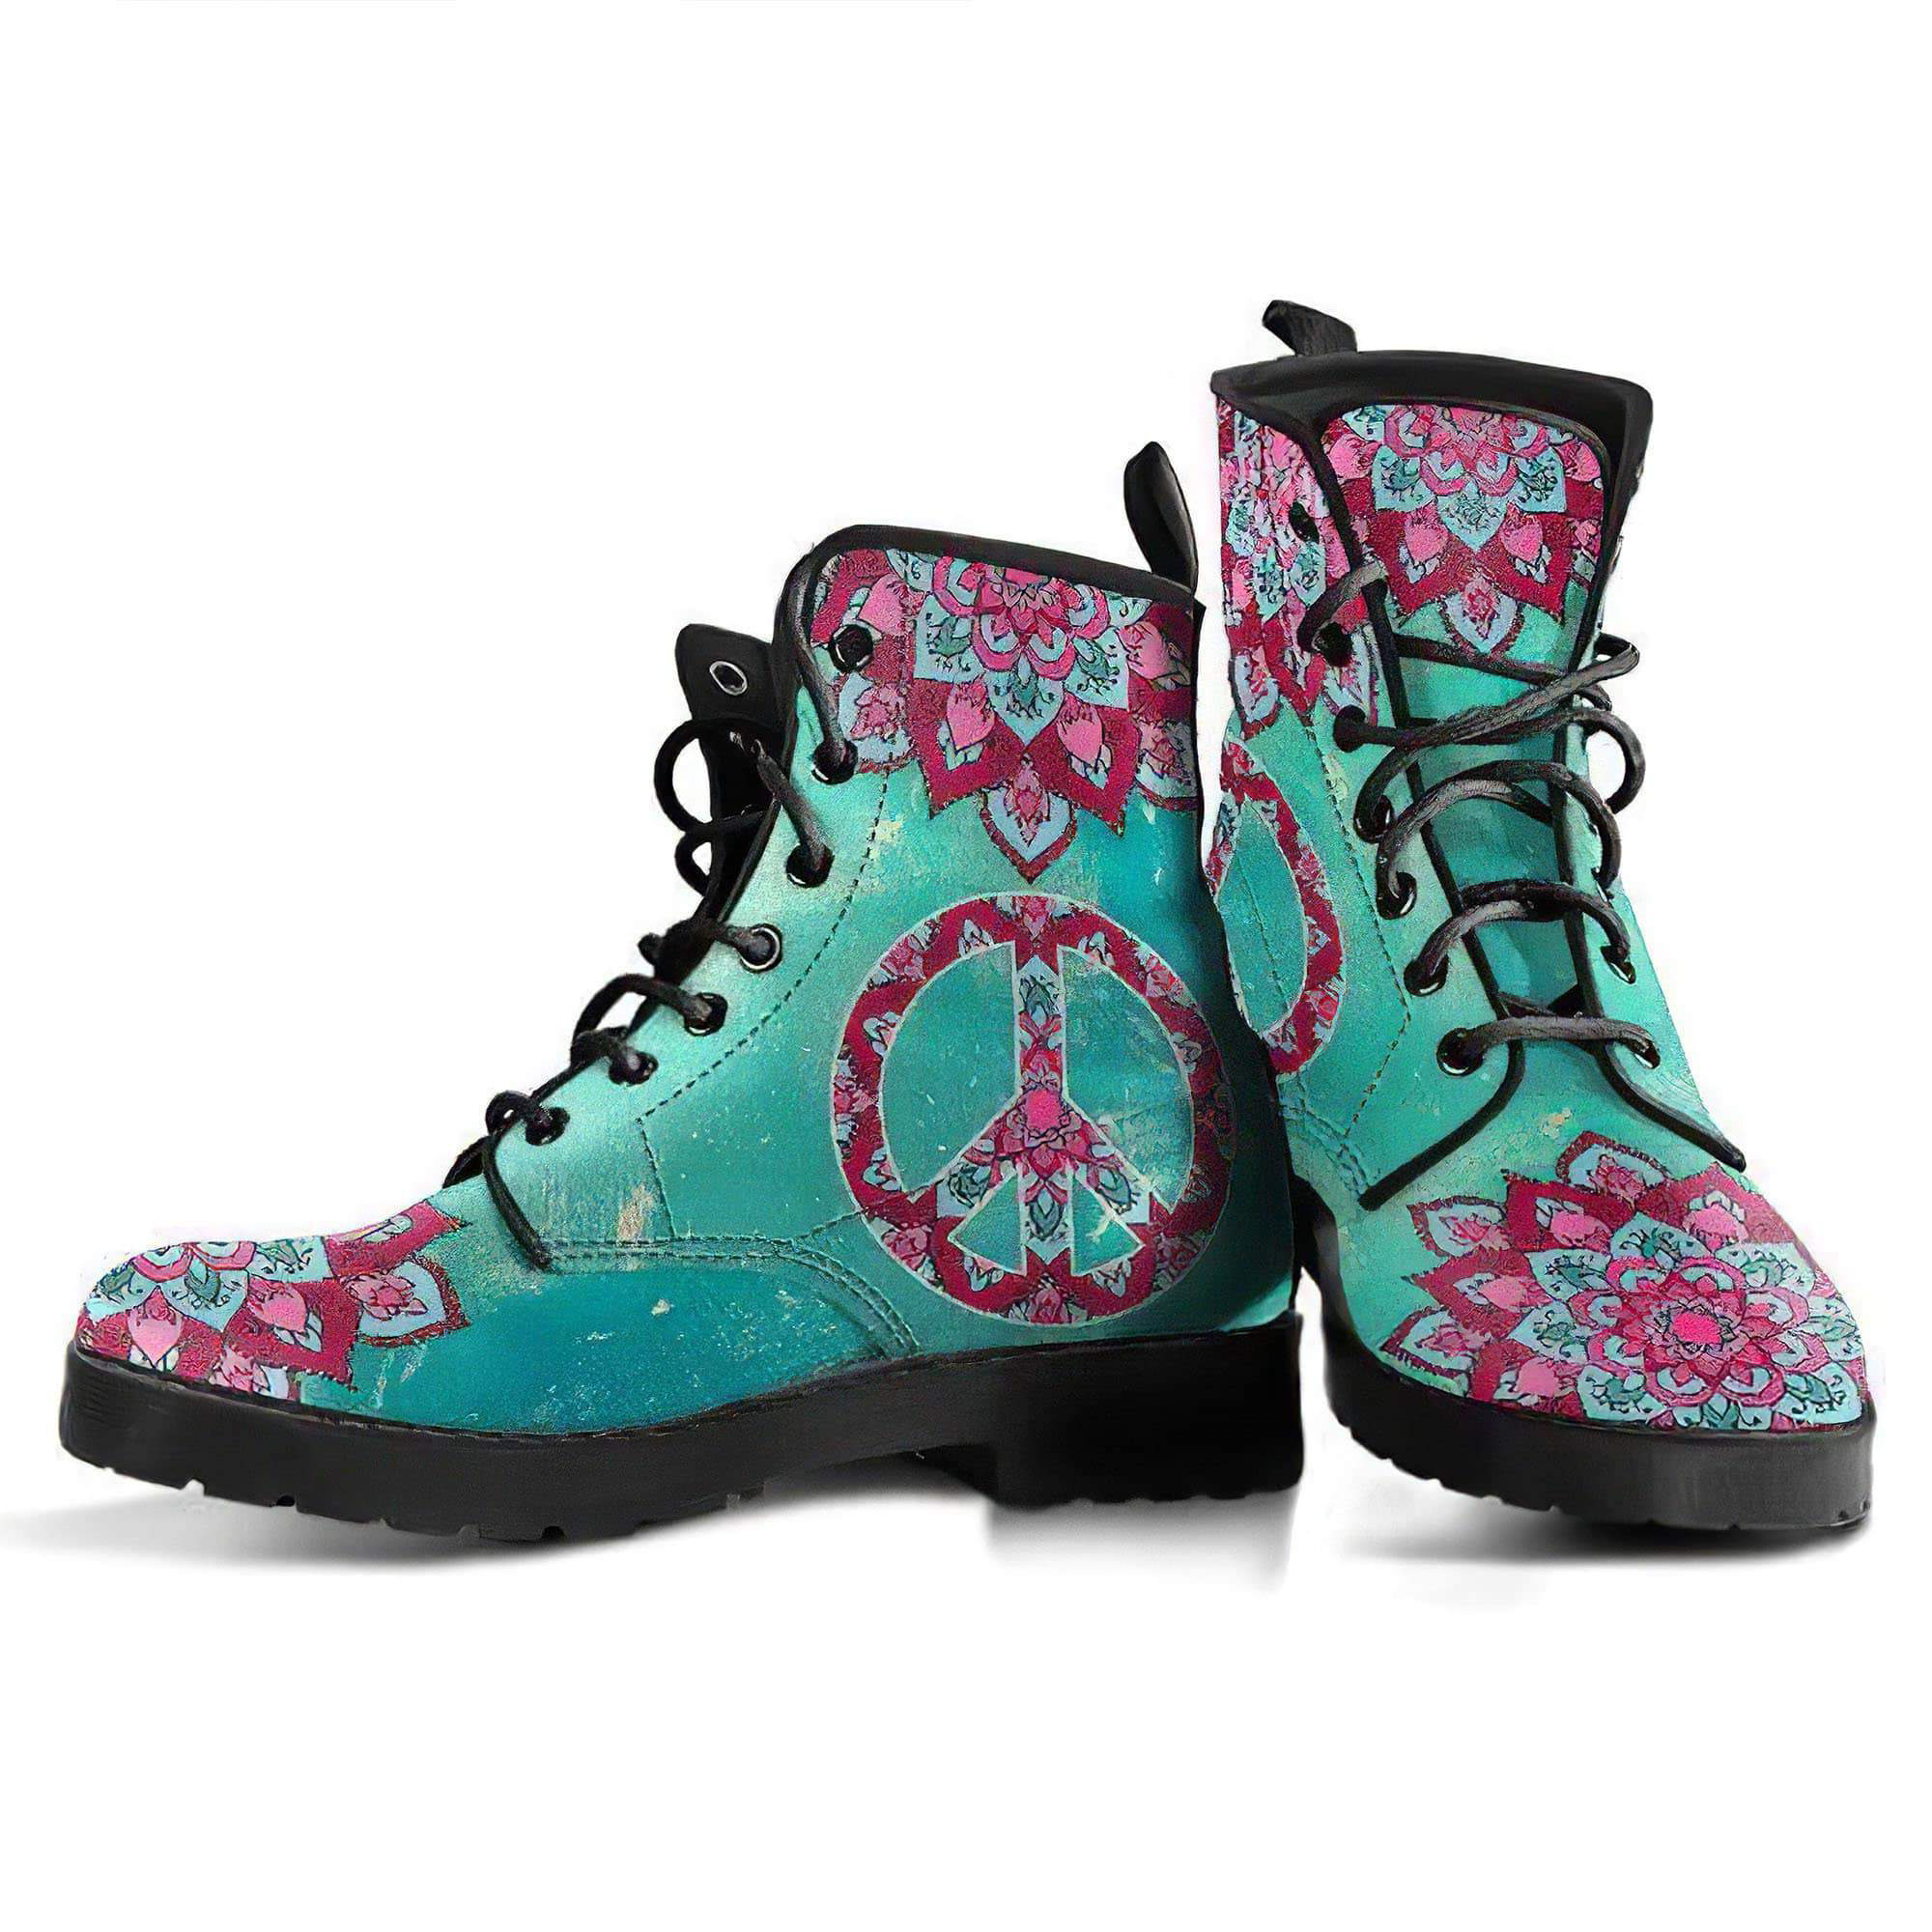 peace-mandala-handcrafted-boots-women-s-leather-boots-12051928154173.jpg